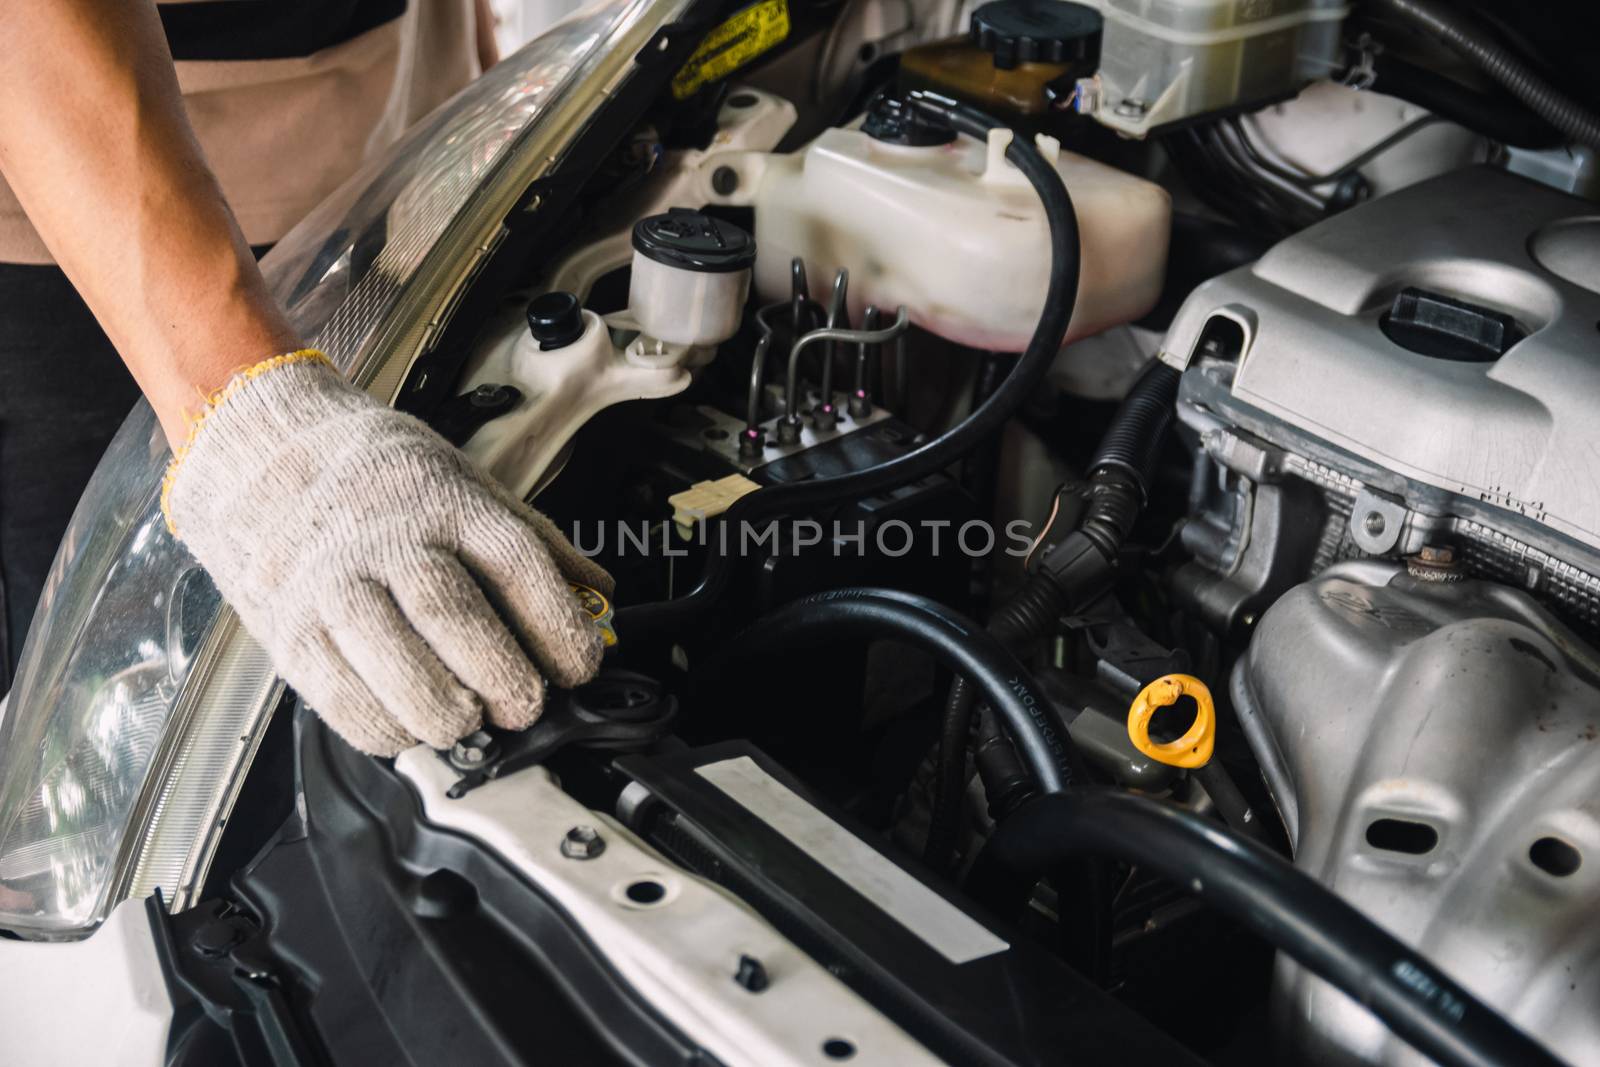 Auto mechanic Repair maintenance and car inspection by sompongtom